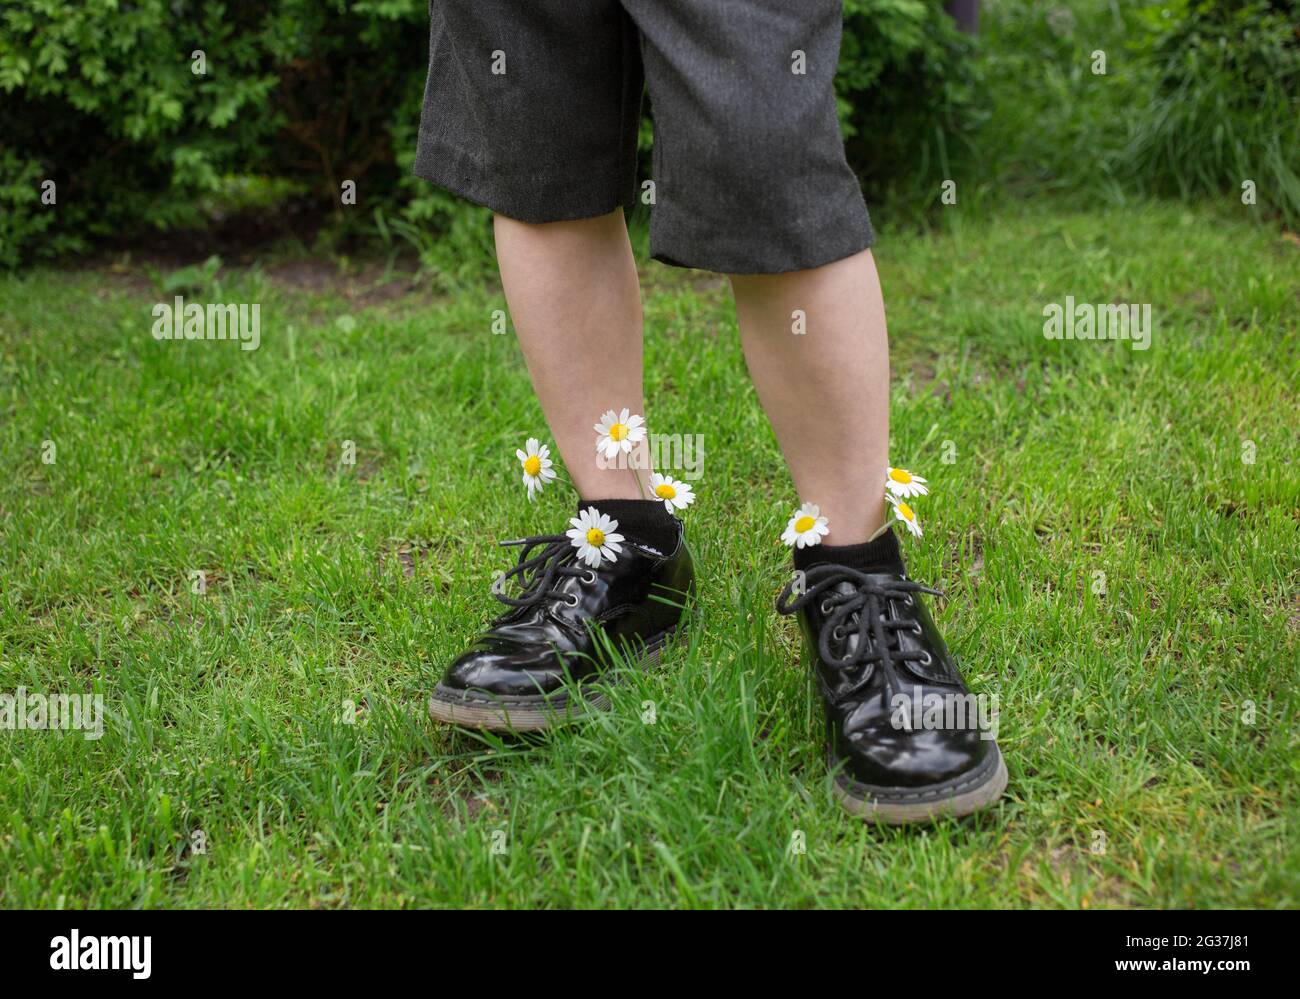 feet of child boy standing on green grass in black patent leather shoes and shorts. Chamomile flower are sticking out of socks. positive atmosphere, h Stock Photo